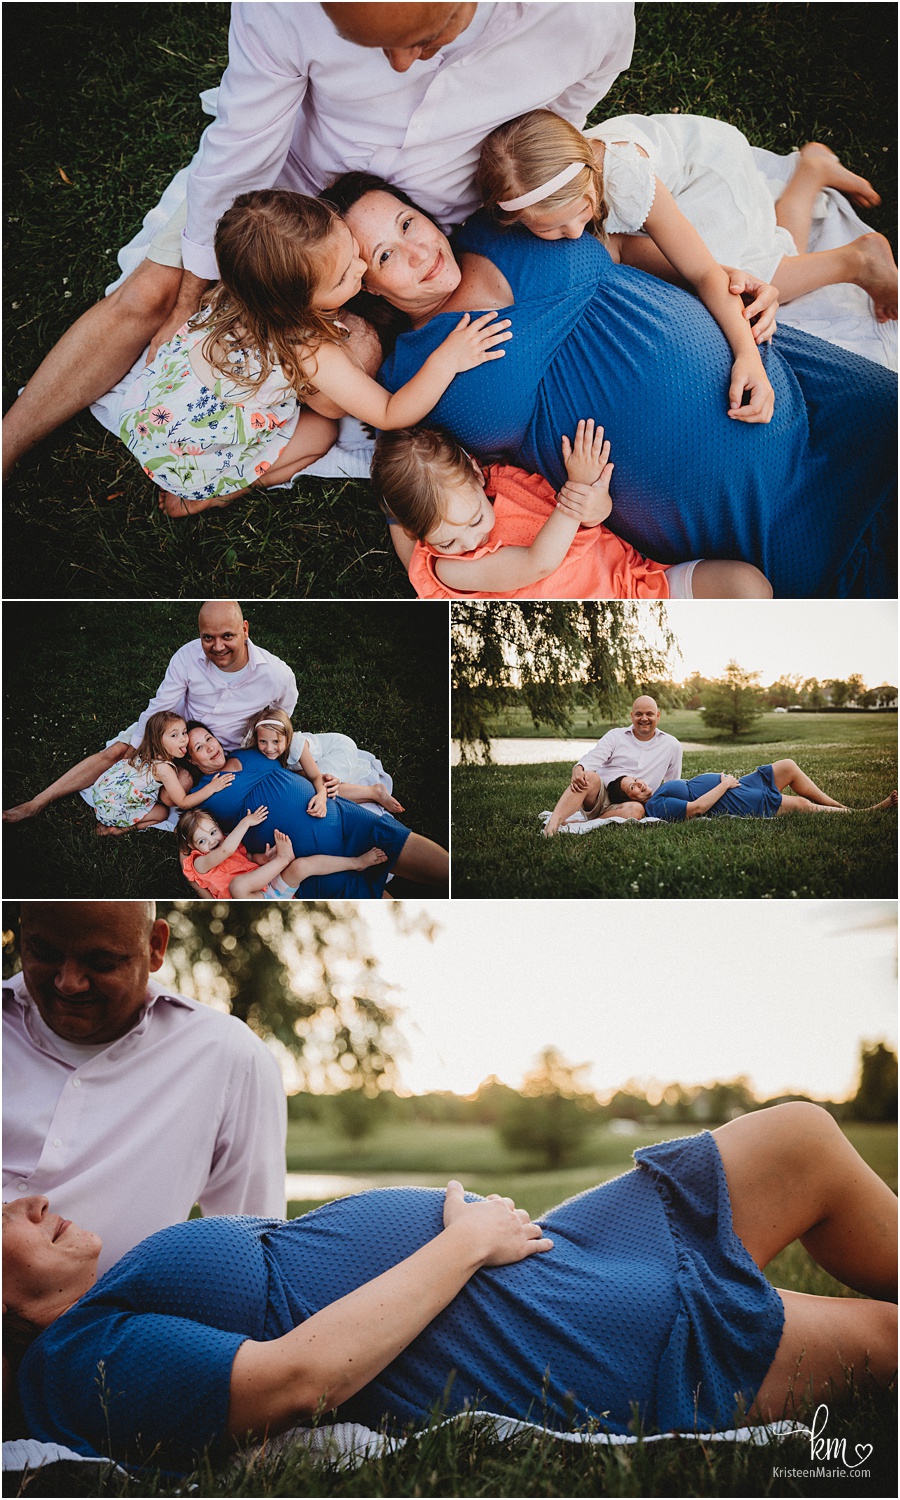 cuddled up - outdoor laying pose maternity photography